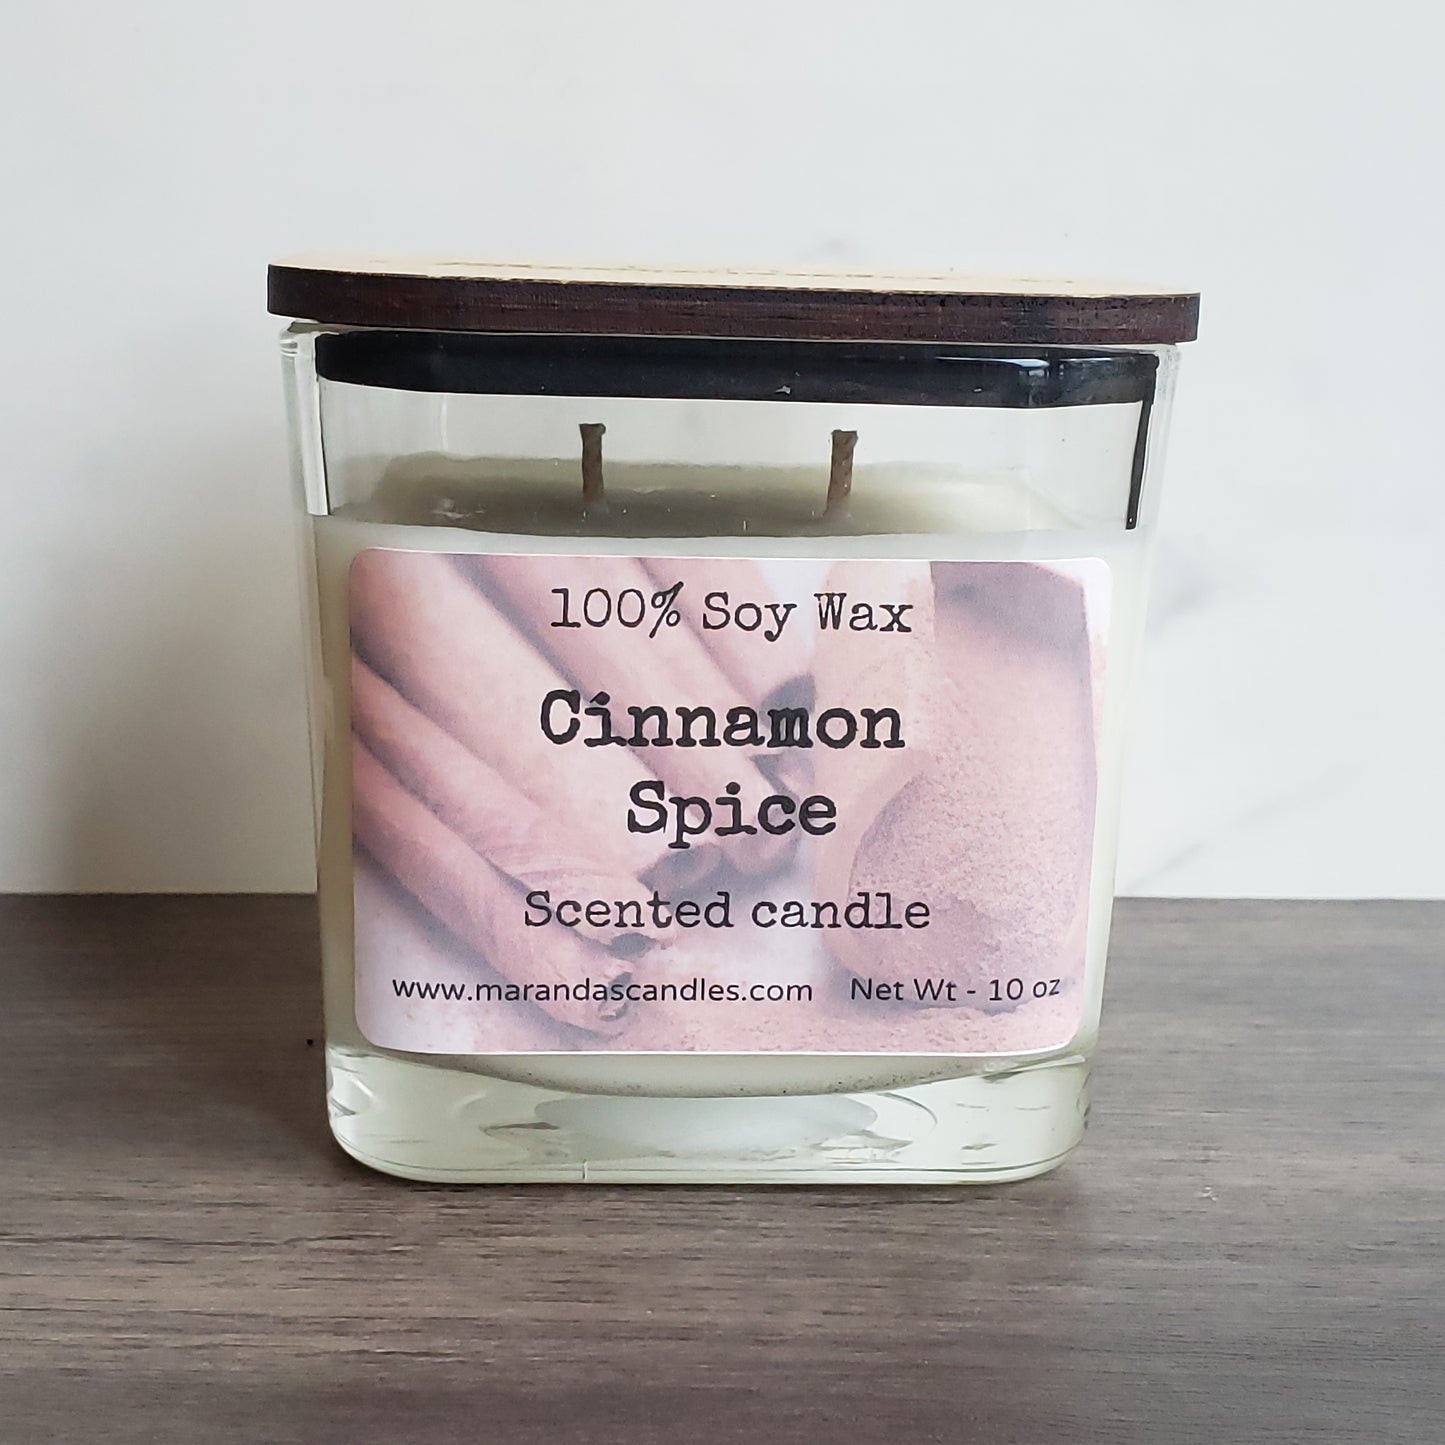 Cinnamon Spice Scented Soy Wax Candle/Wax Melts